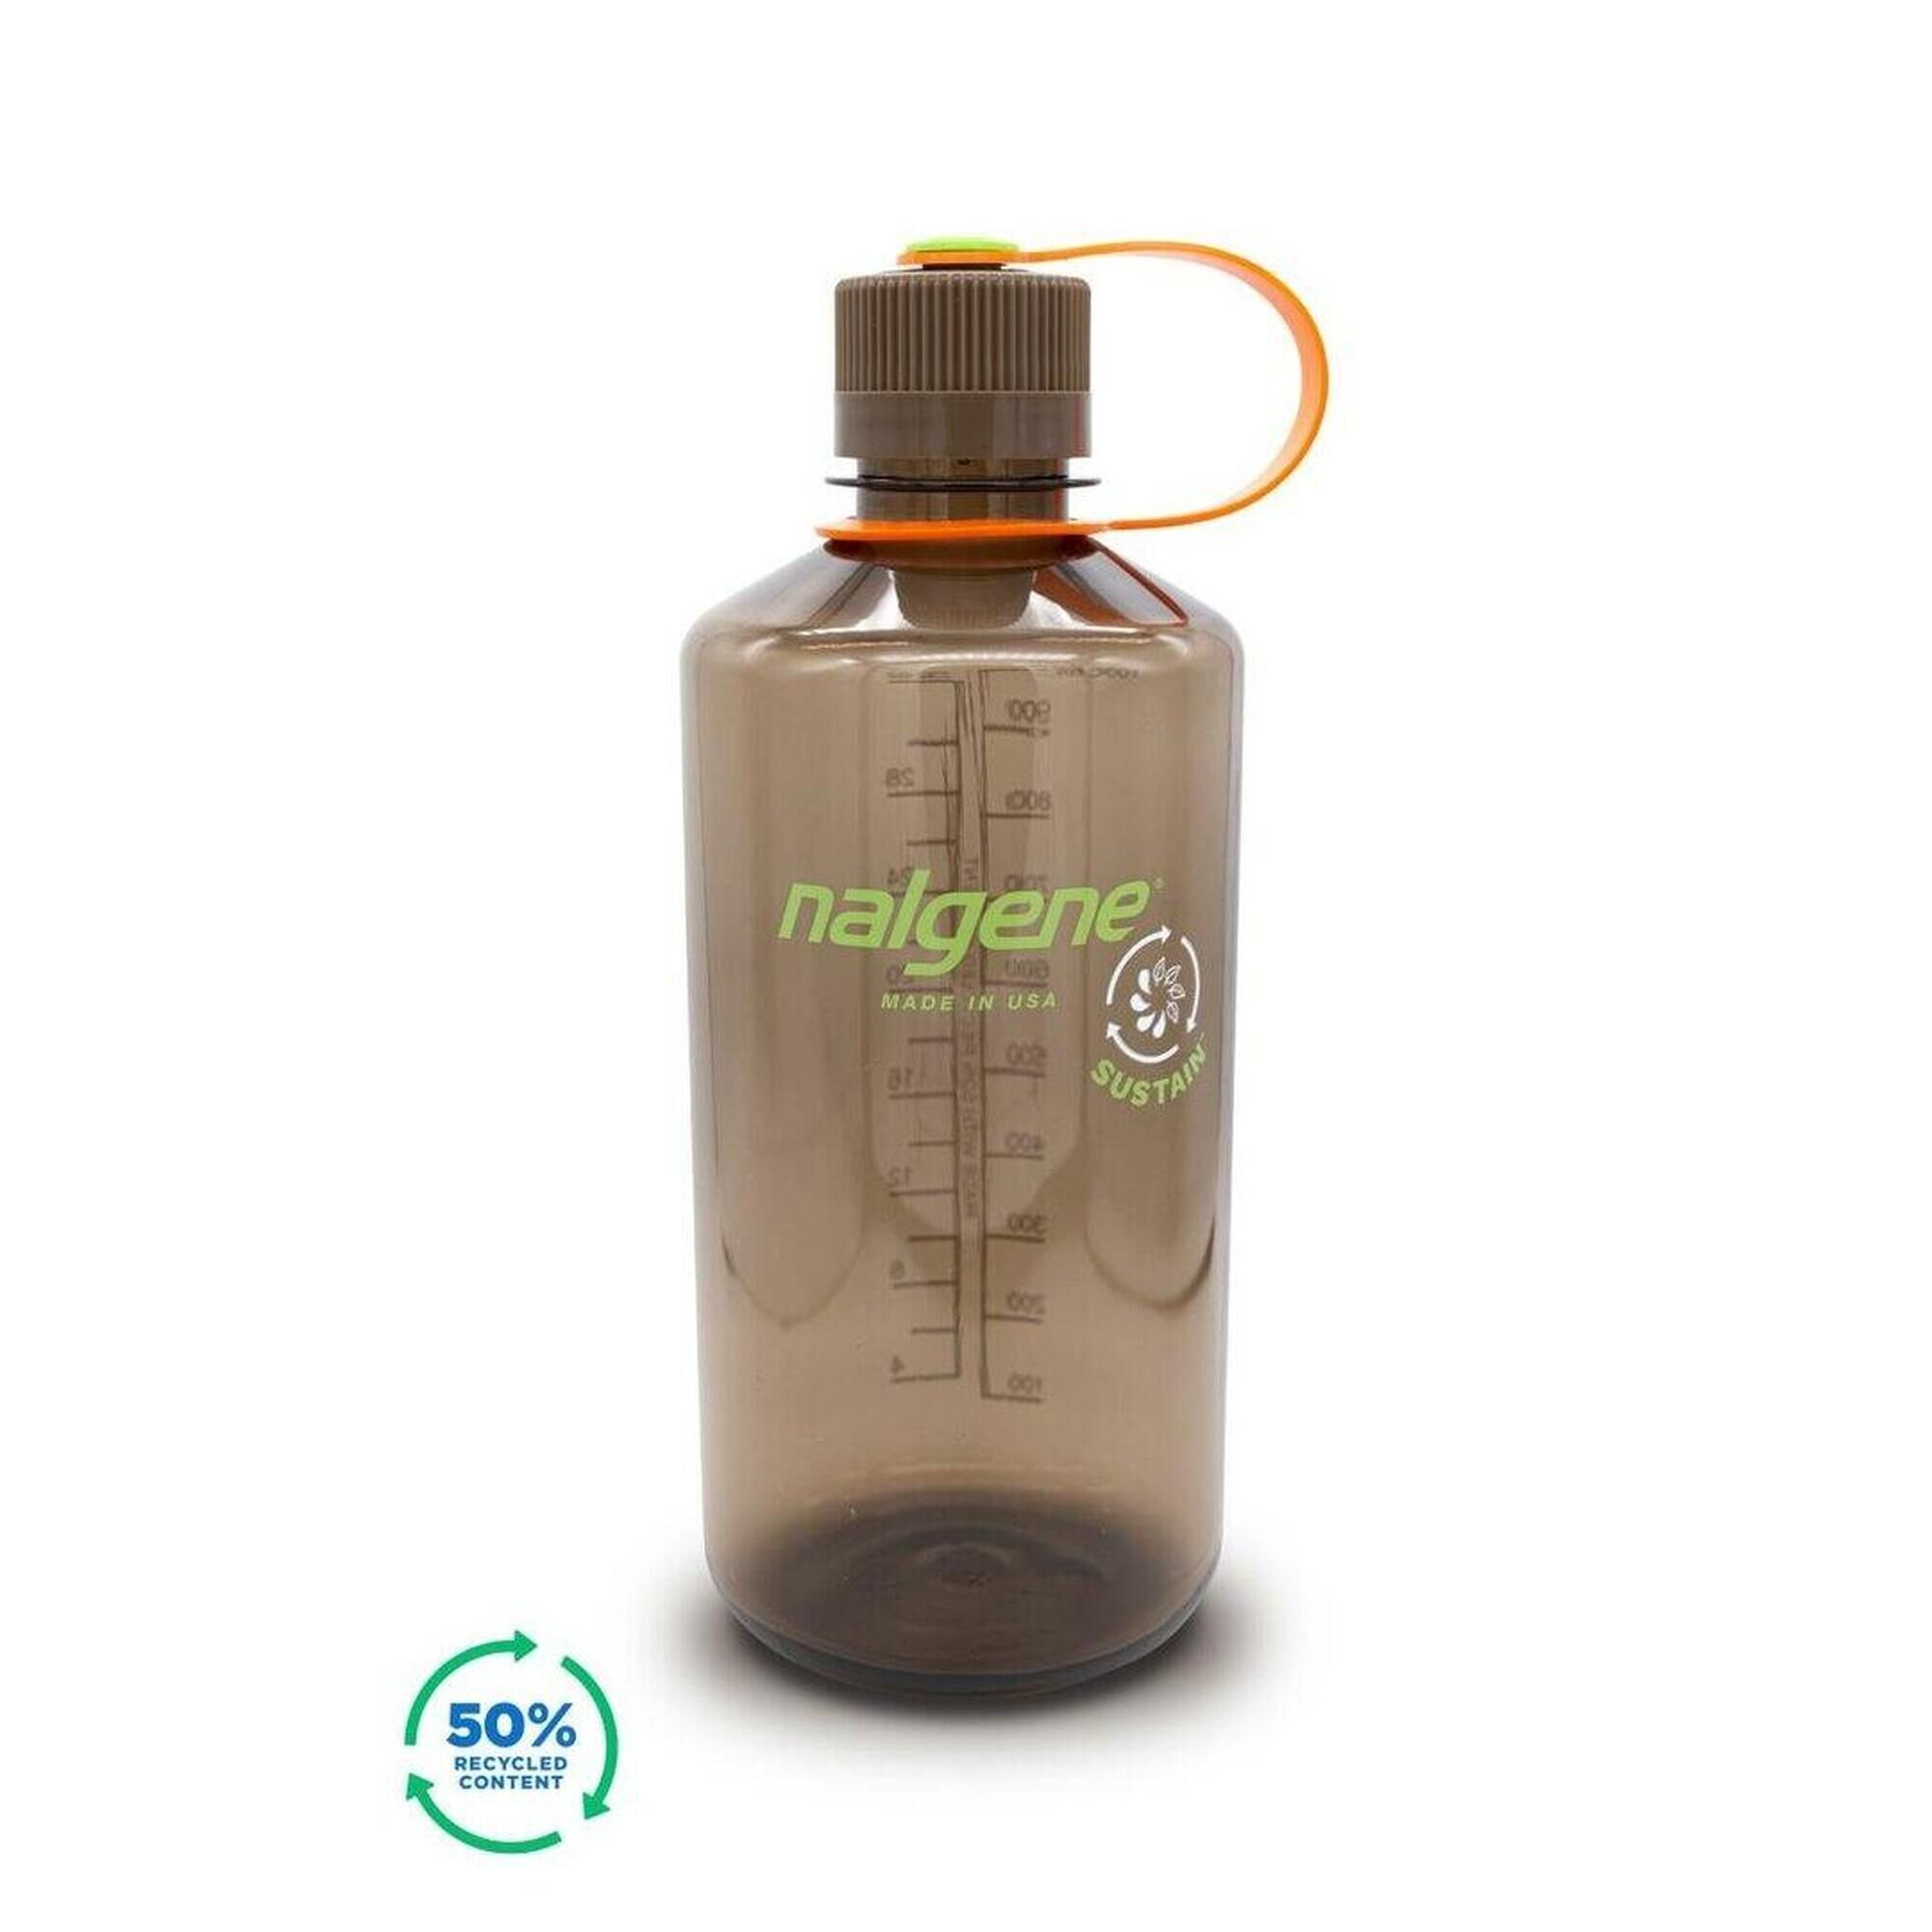 NALGENE 1L Narrow Mouth Sustain Water Bottle - Made From 50% Plastic Waste - Bark Brown